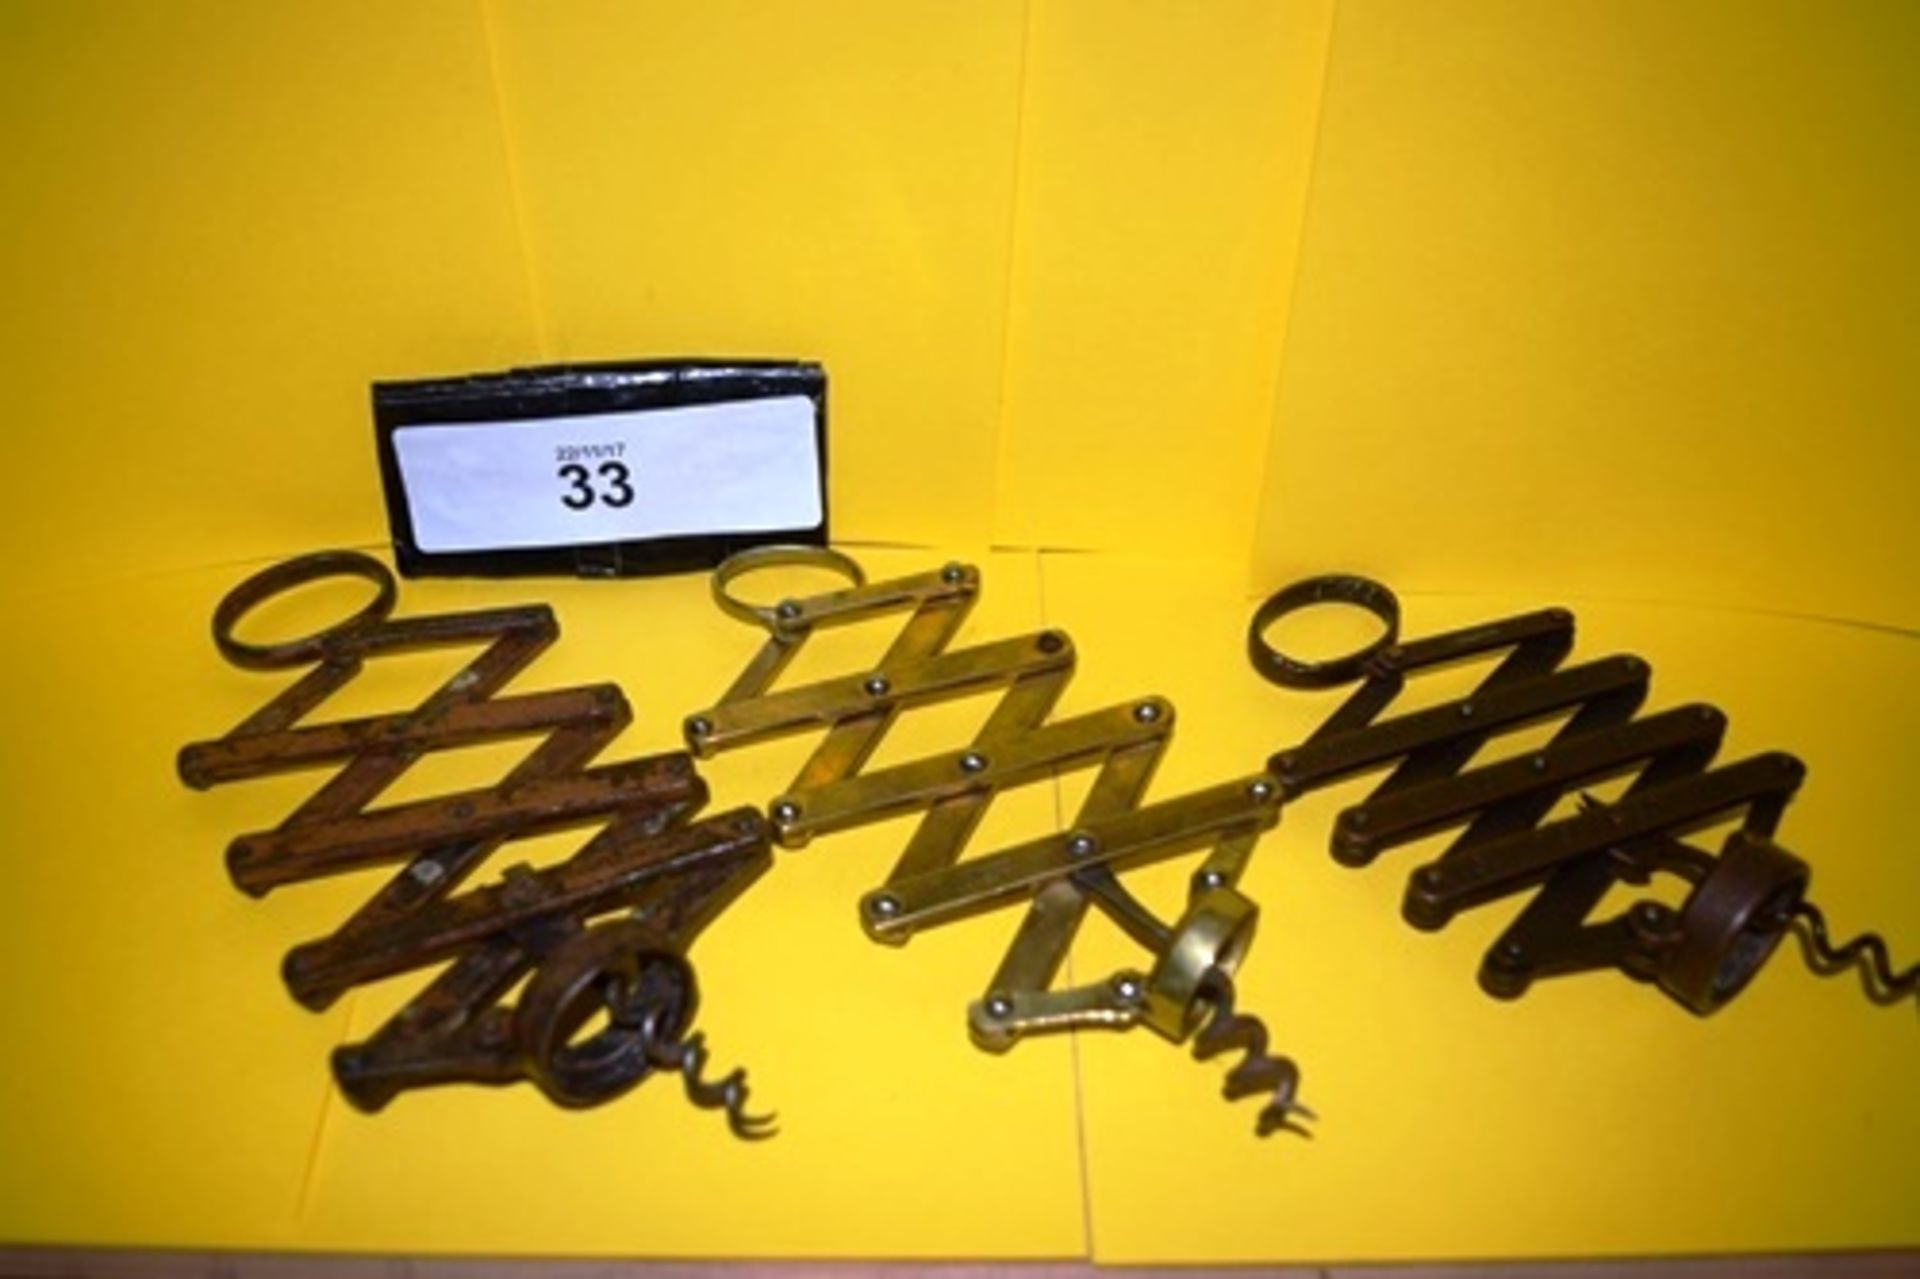 A collection of 3 x compound lever corkscrews, one marked Weir's Patent 12804 J Heeley & Sons Ltd